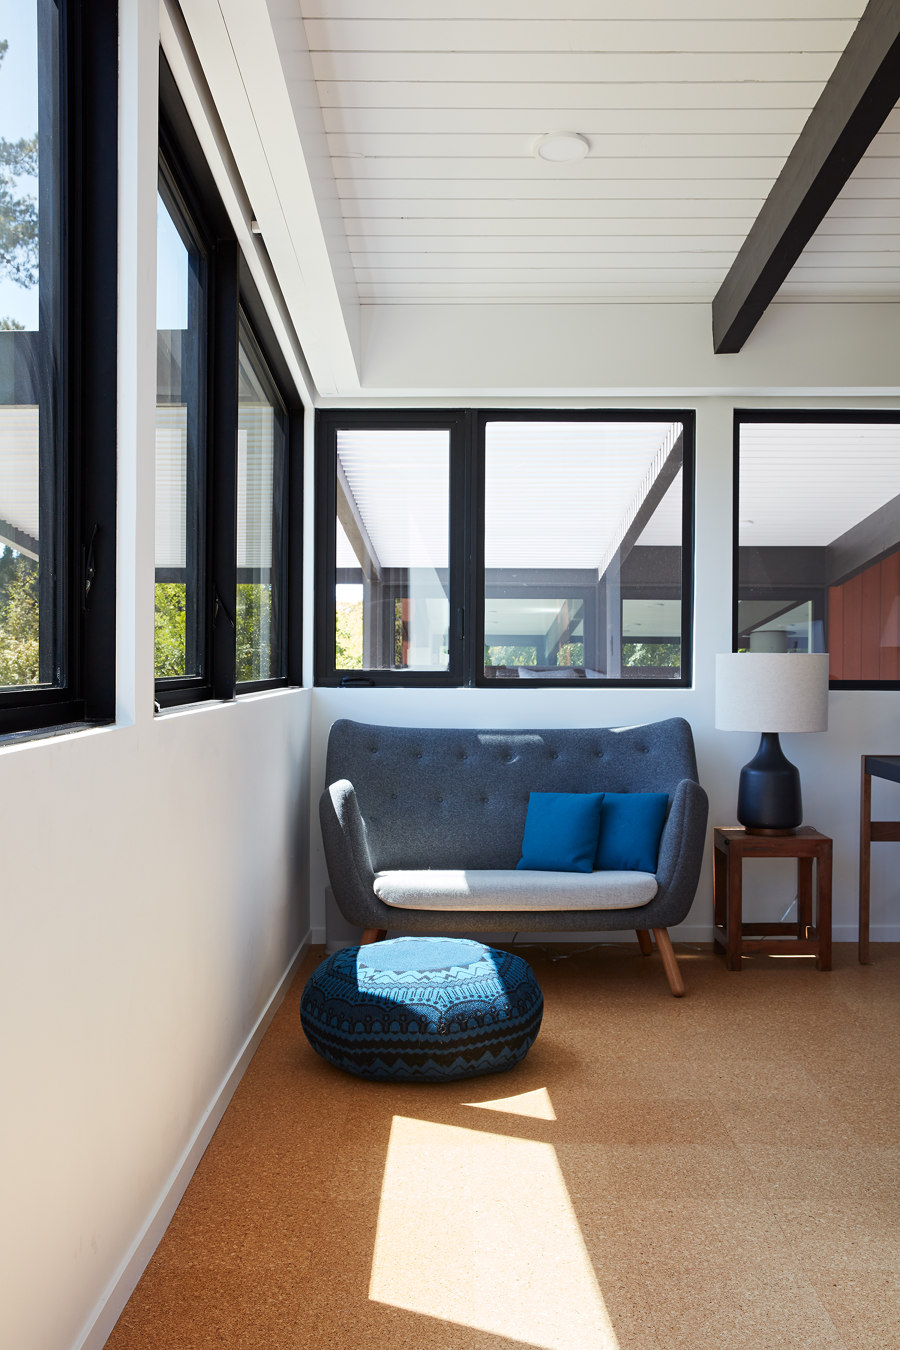 Stanford Mid-Century Modern Remodel Addition by Klopf Architecture | Detached houses